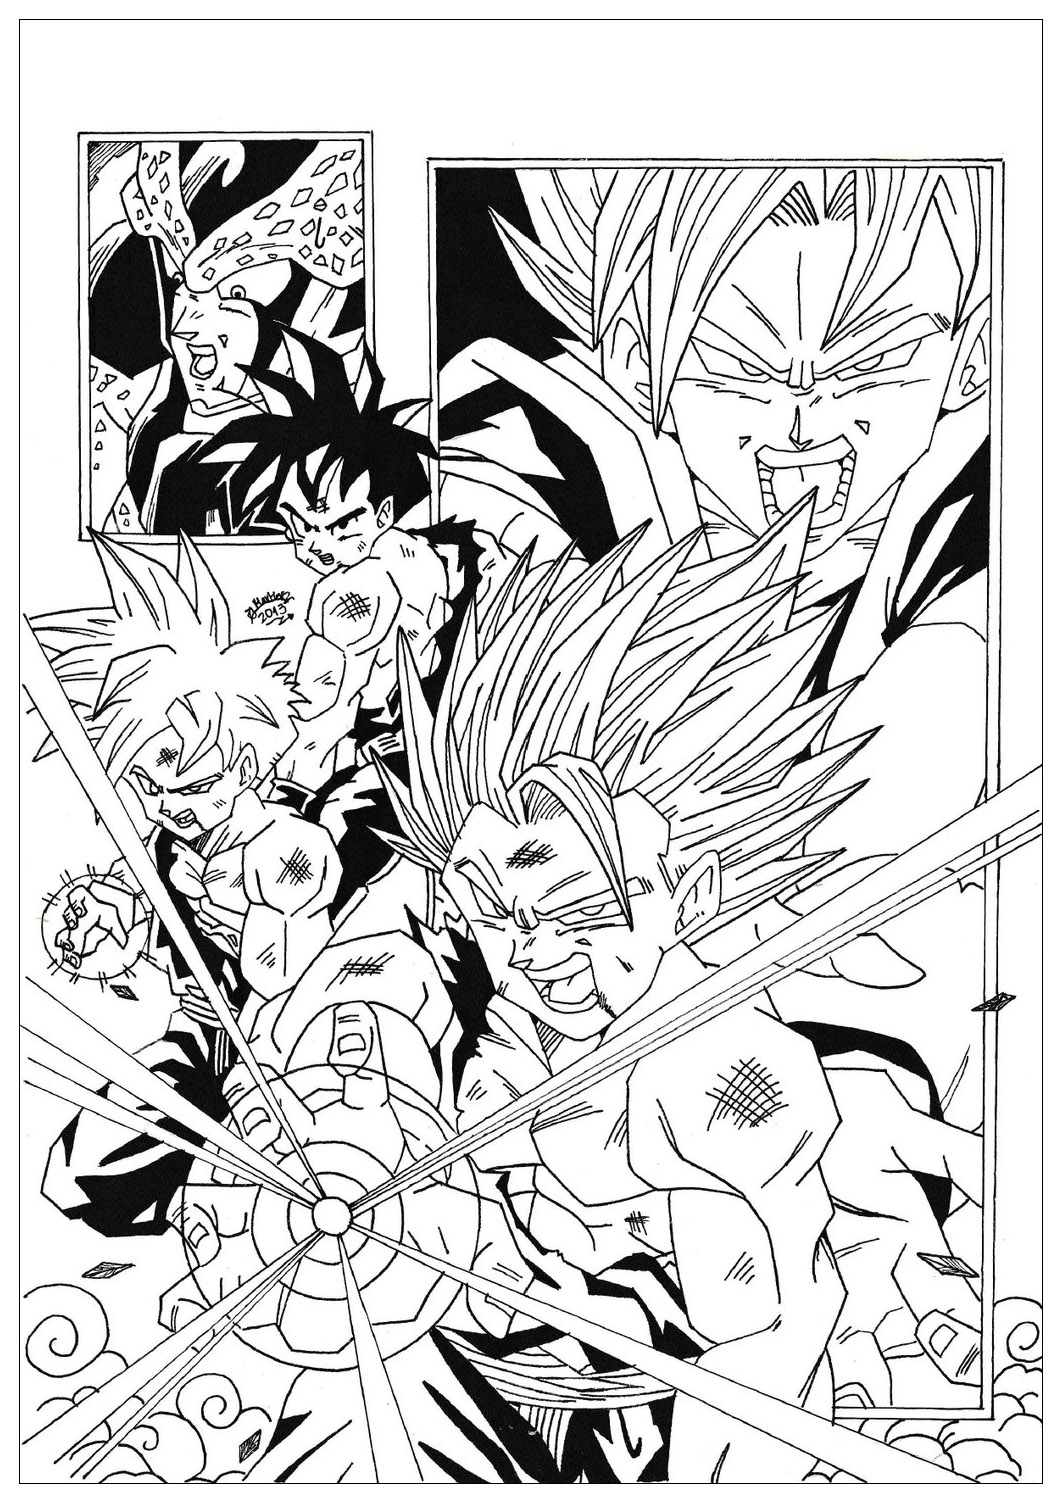 Free Dragon Ball Z coloring page to print and color : Cell against Songoku and Songohan